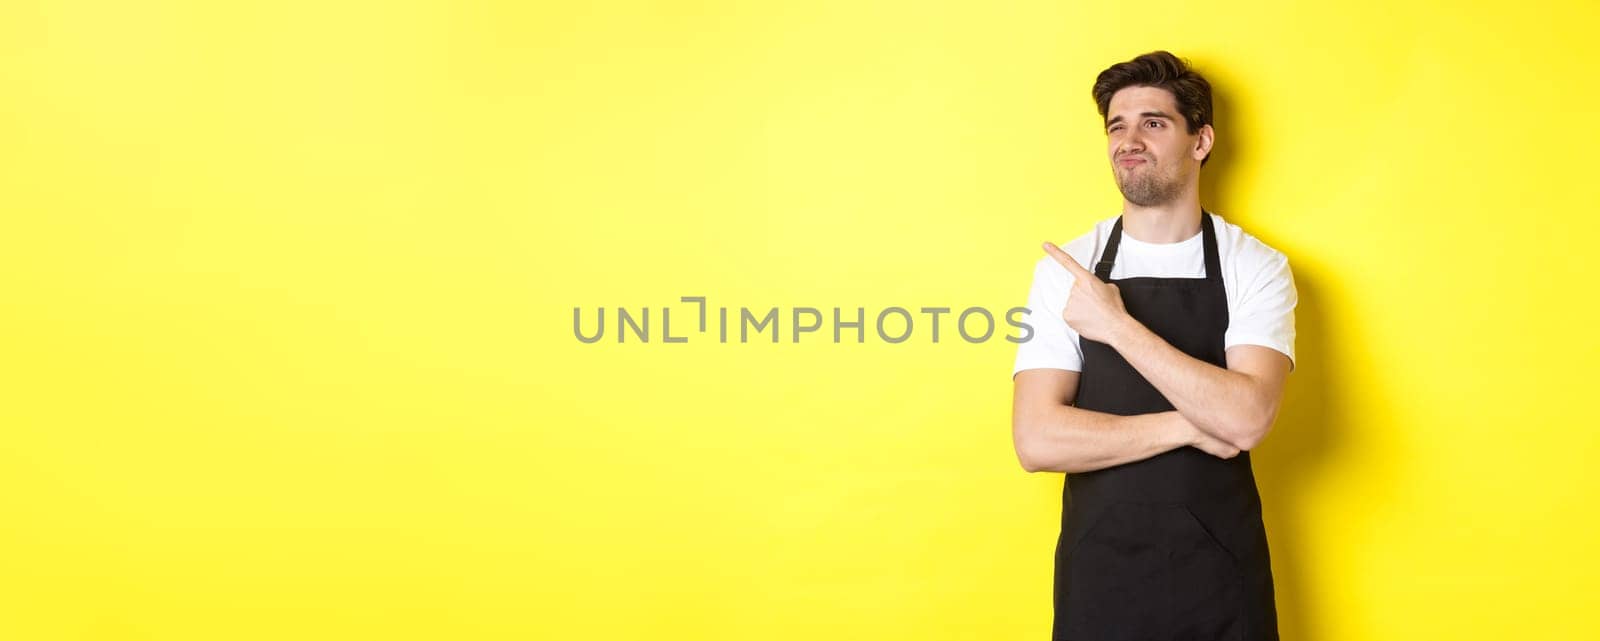 Skeptical male seller in black apron looking displeased, grimacing and pointing left at advertisement, standing over yellow background.